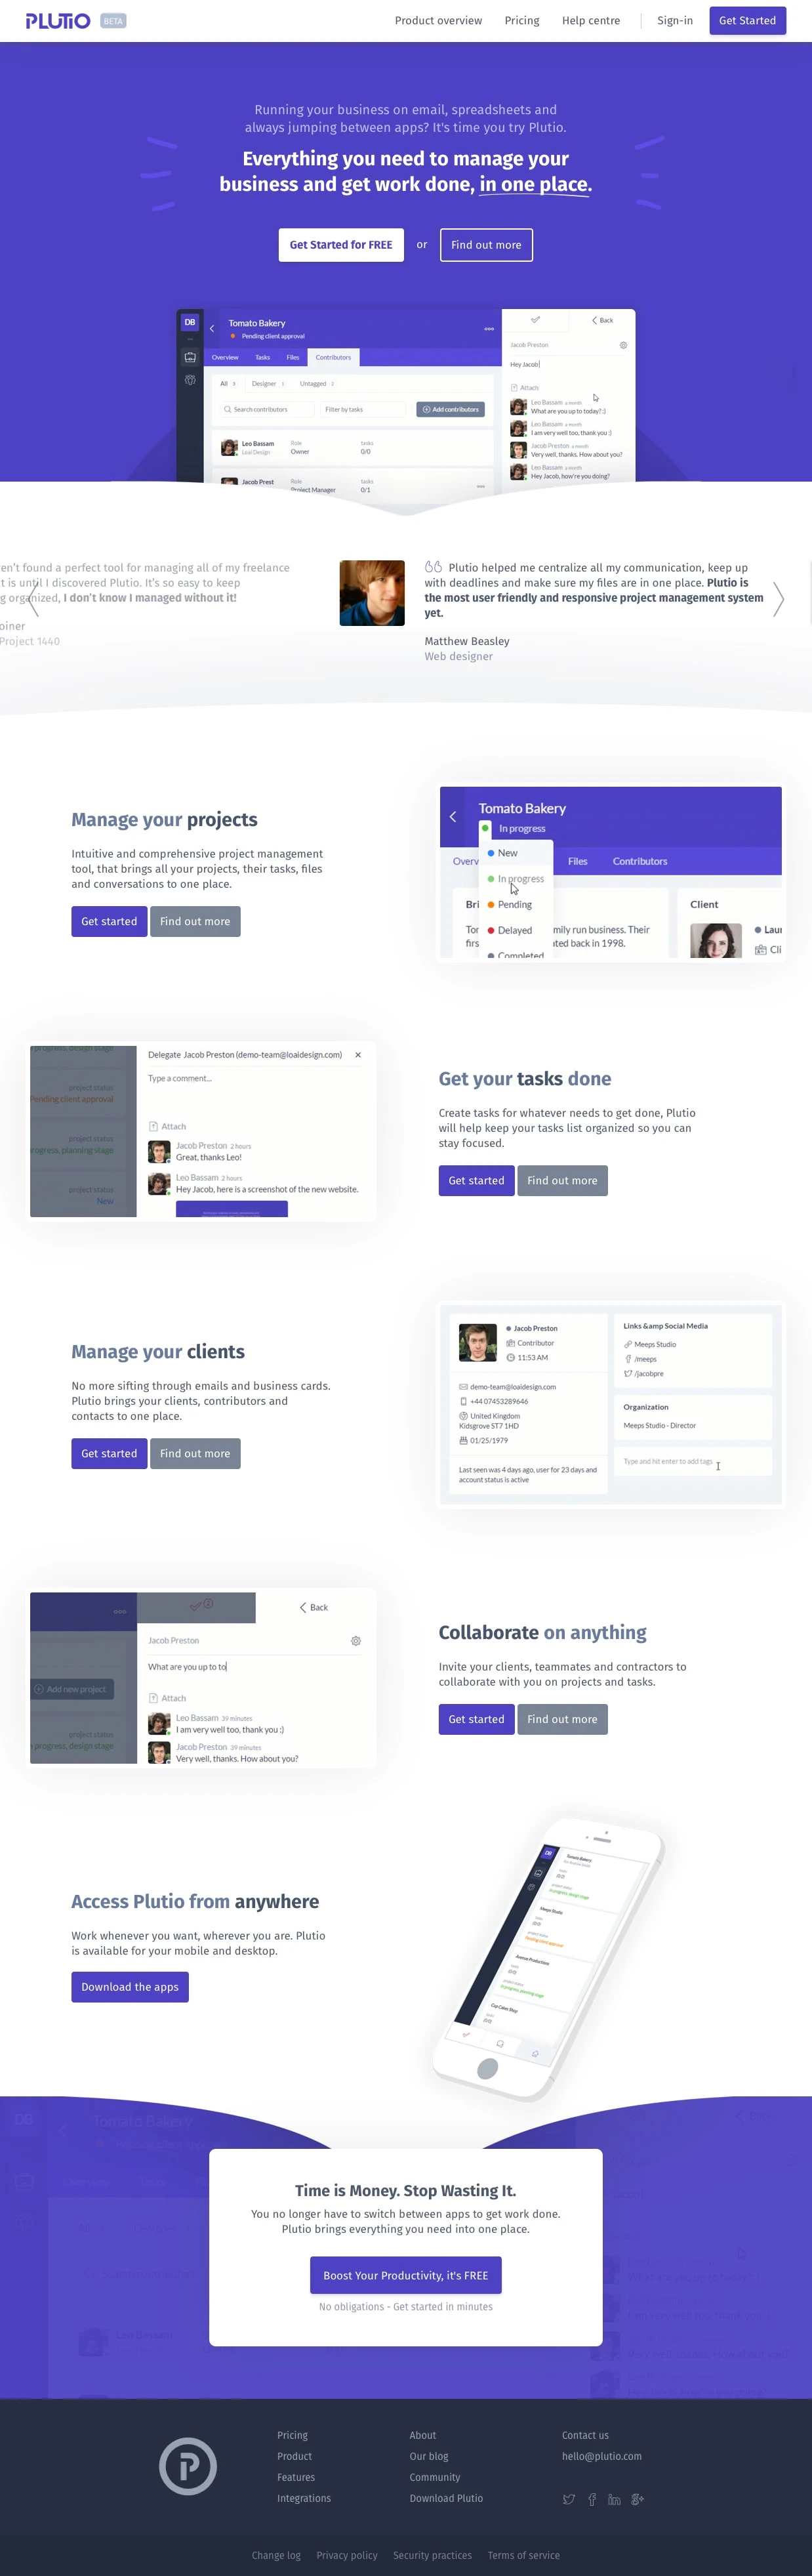 Plutio  Landing Page Example: Everything you need to run your business and get work done, solely or with a team.